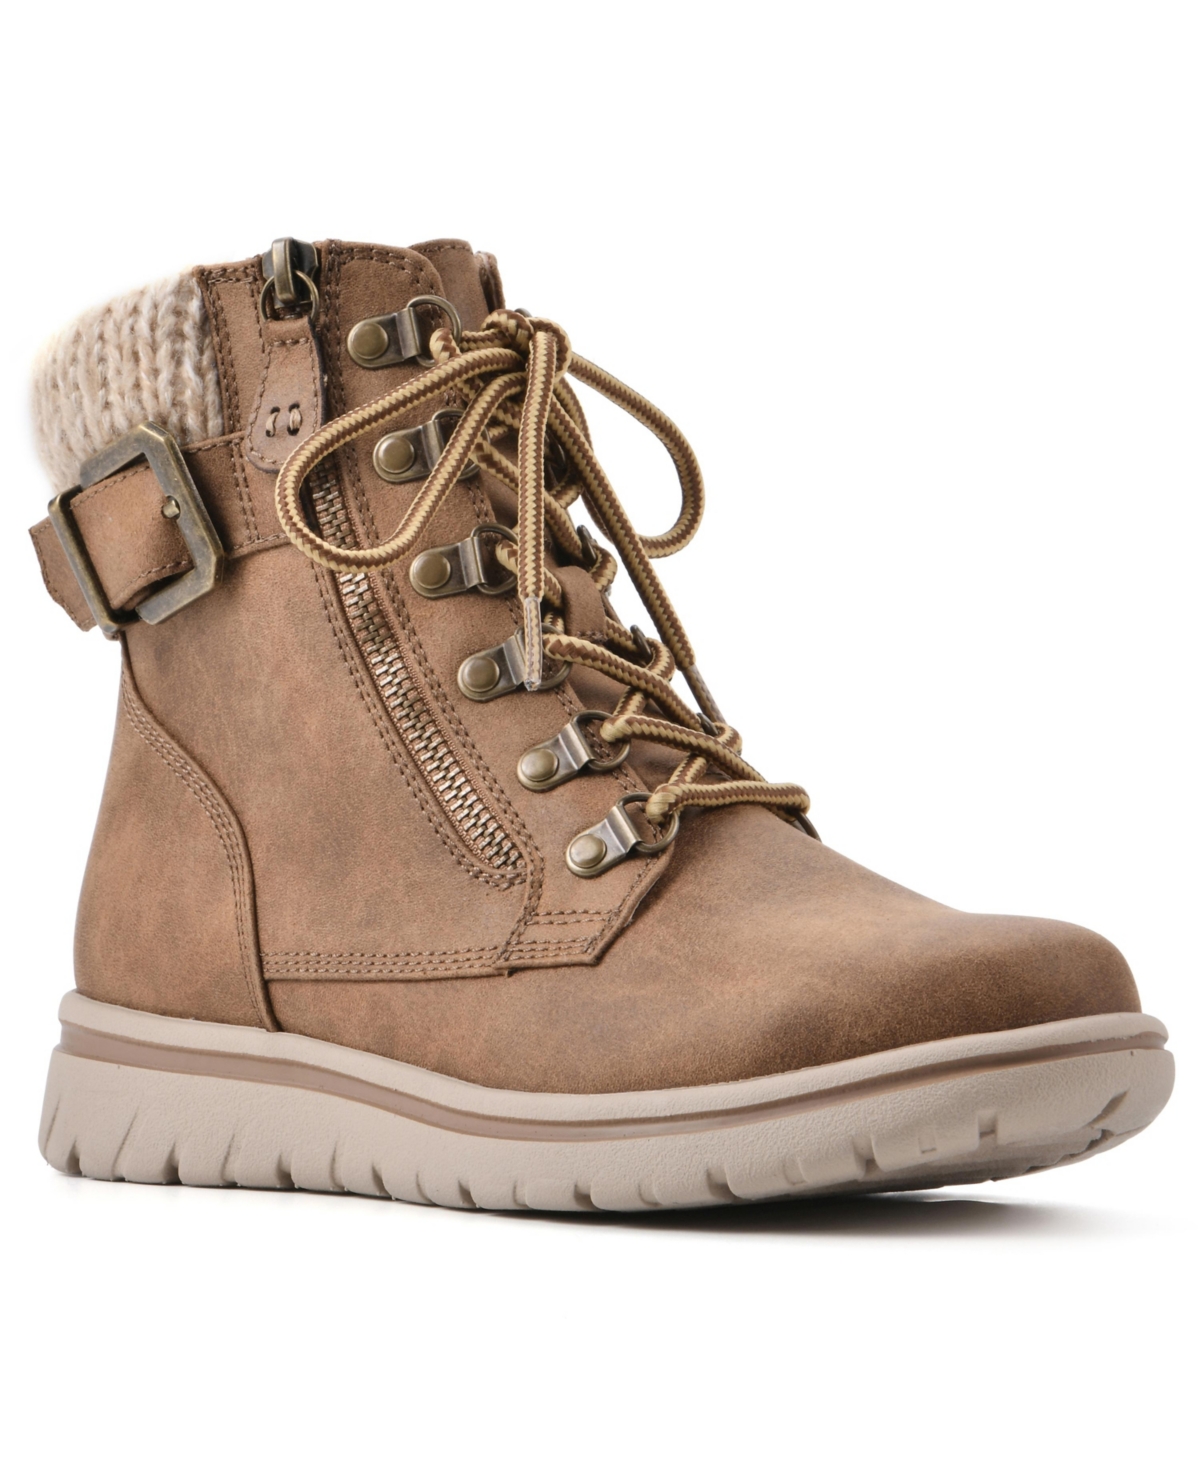 CLIFFS BY WHITE MOUNTAIN WOMEN'S HEARTY LACE-UP HIKER BOOTIES